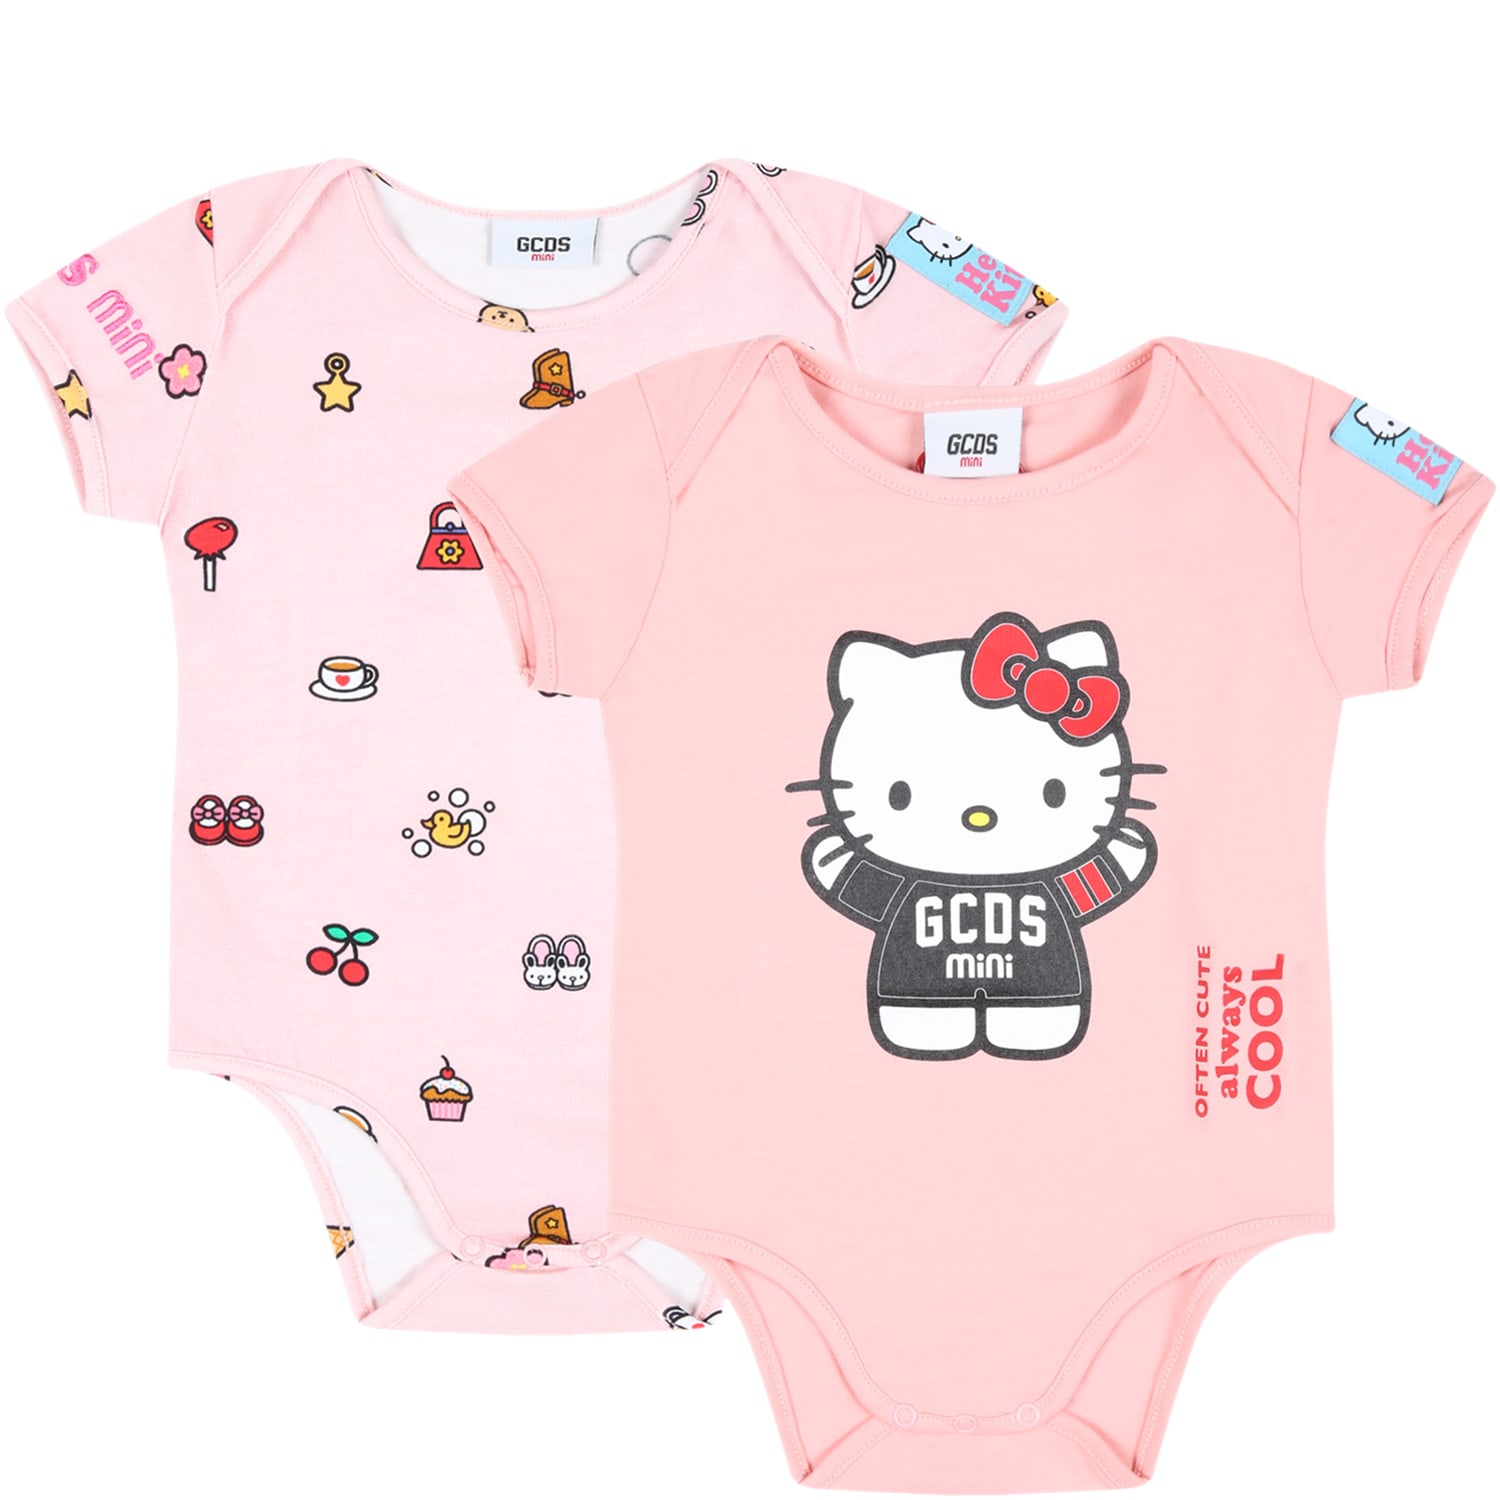 GCDS MINI PINK SET FOR BABY GIRL WITH HELLO KITTY